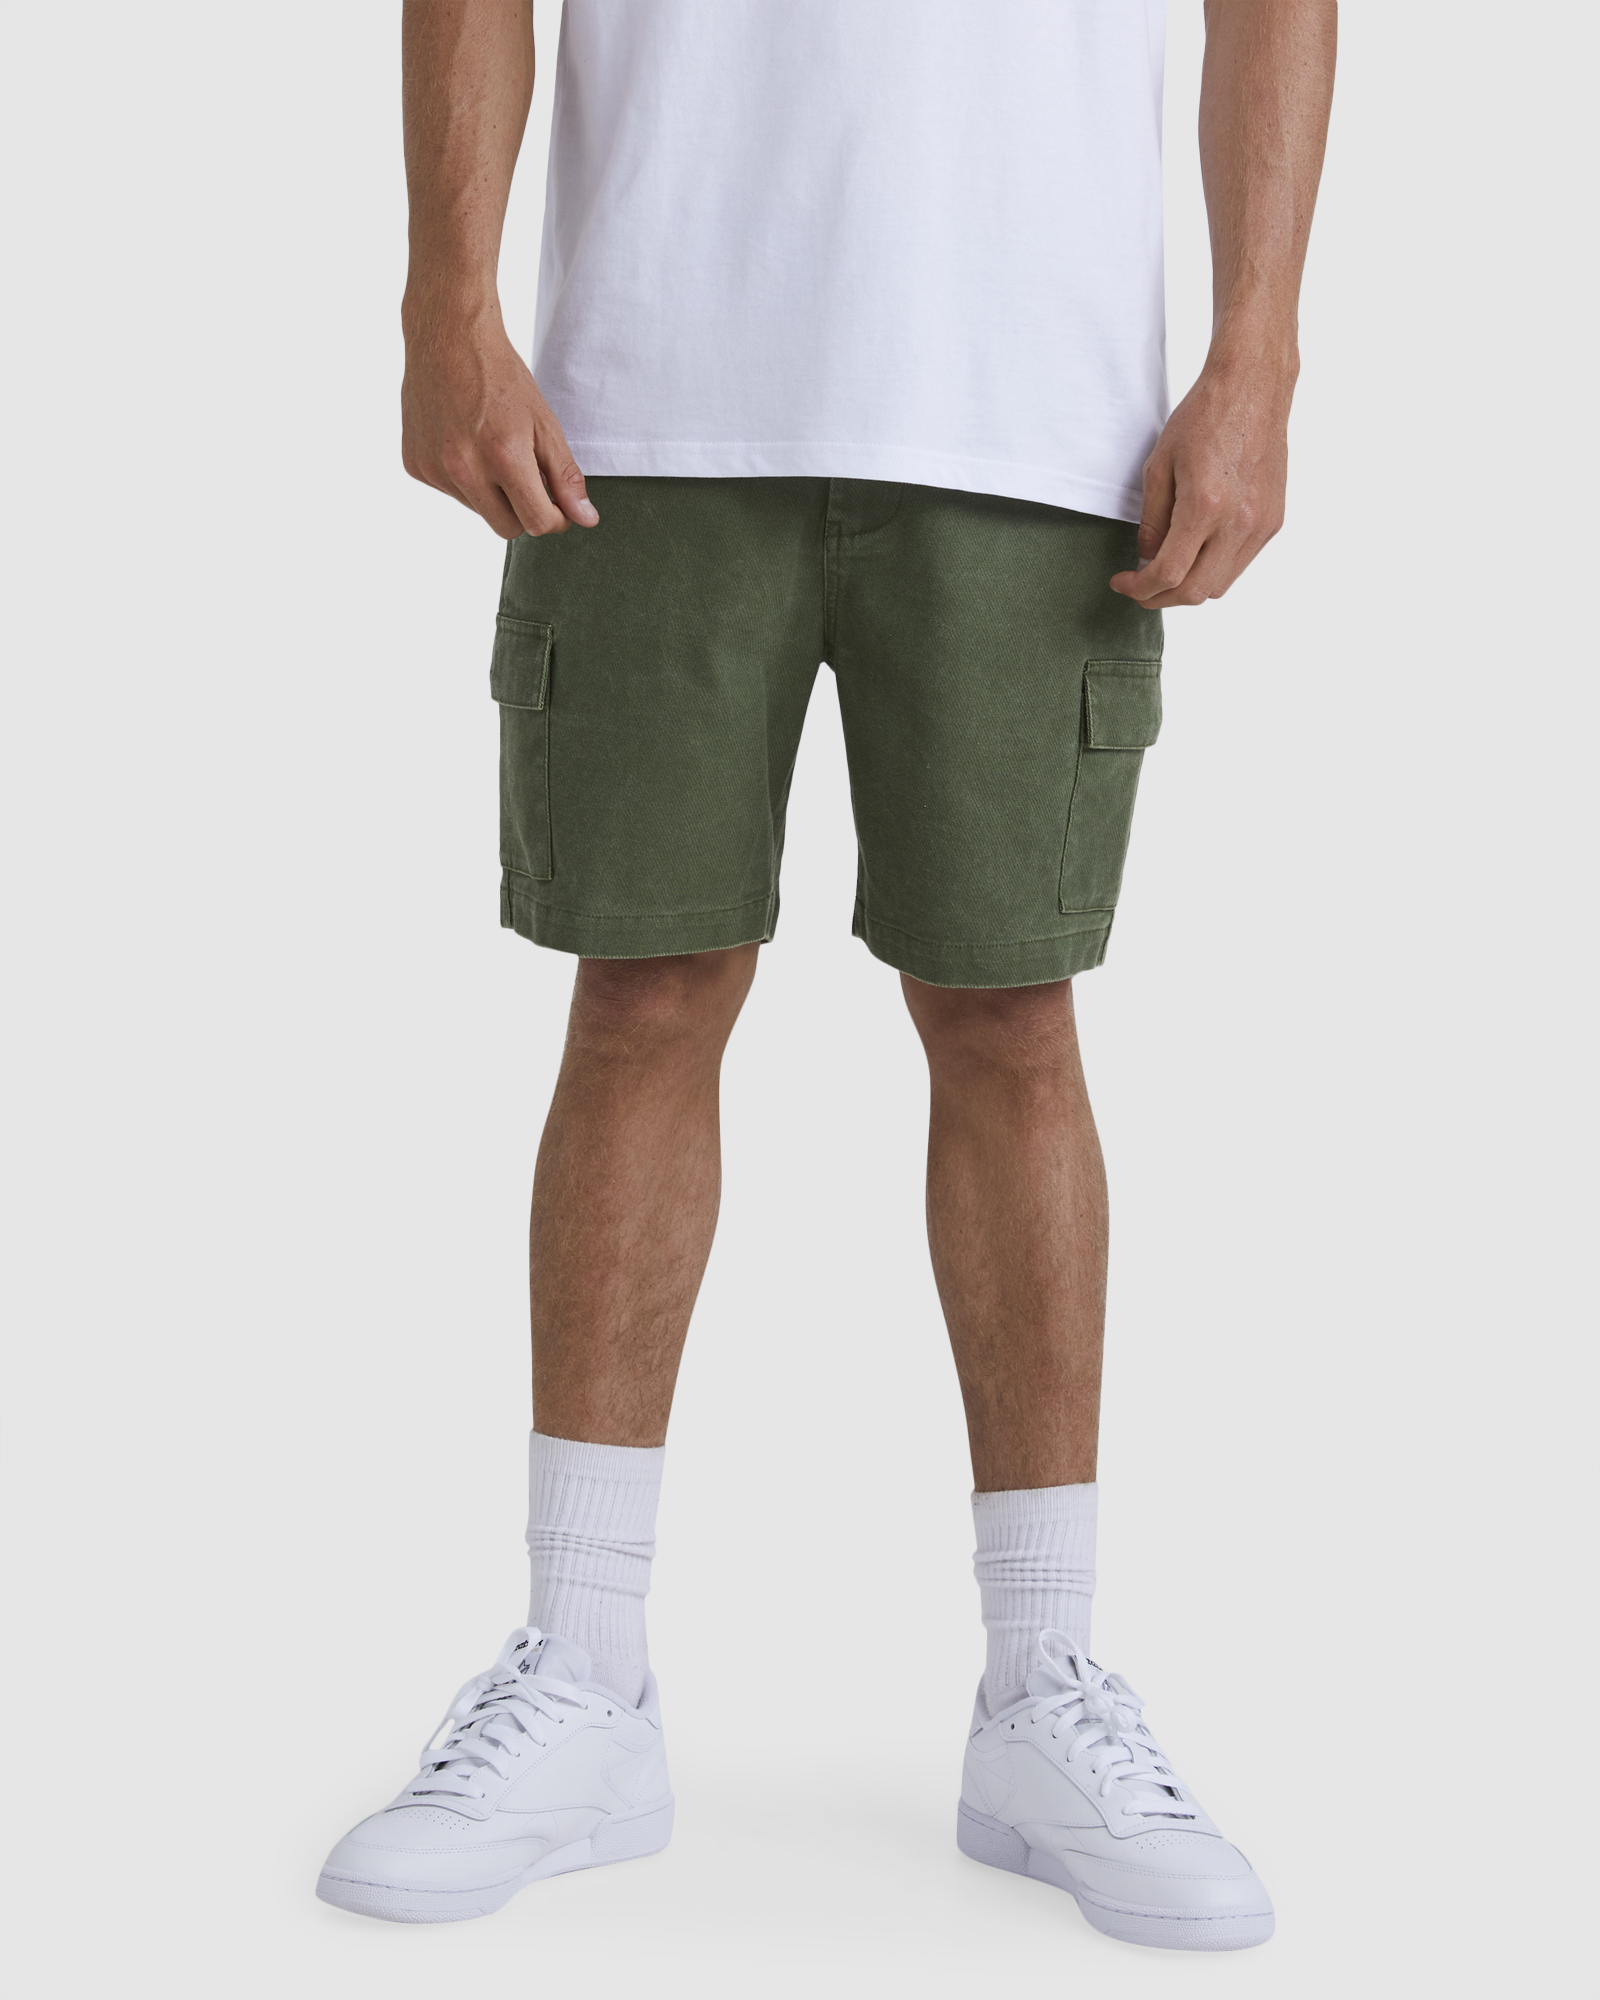 Quiksilver Mens Crowded Cargo Shorts - Four Leaf Clover | SurfStitch